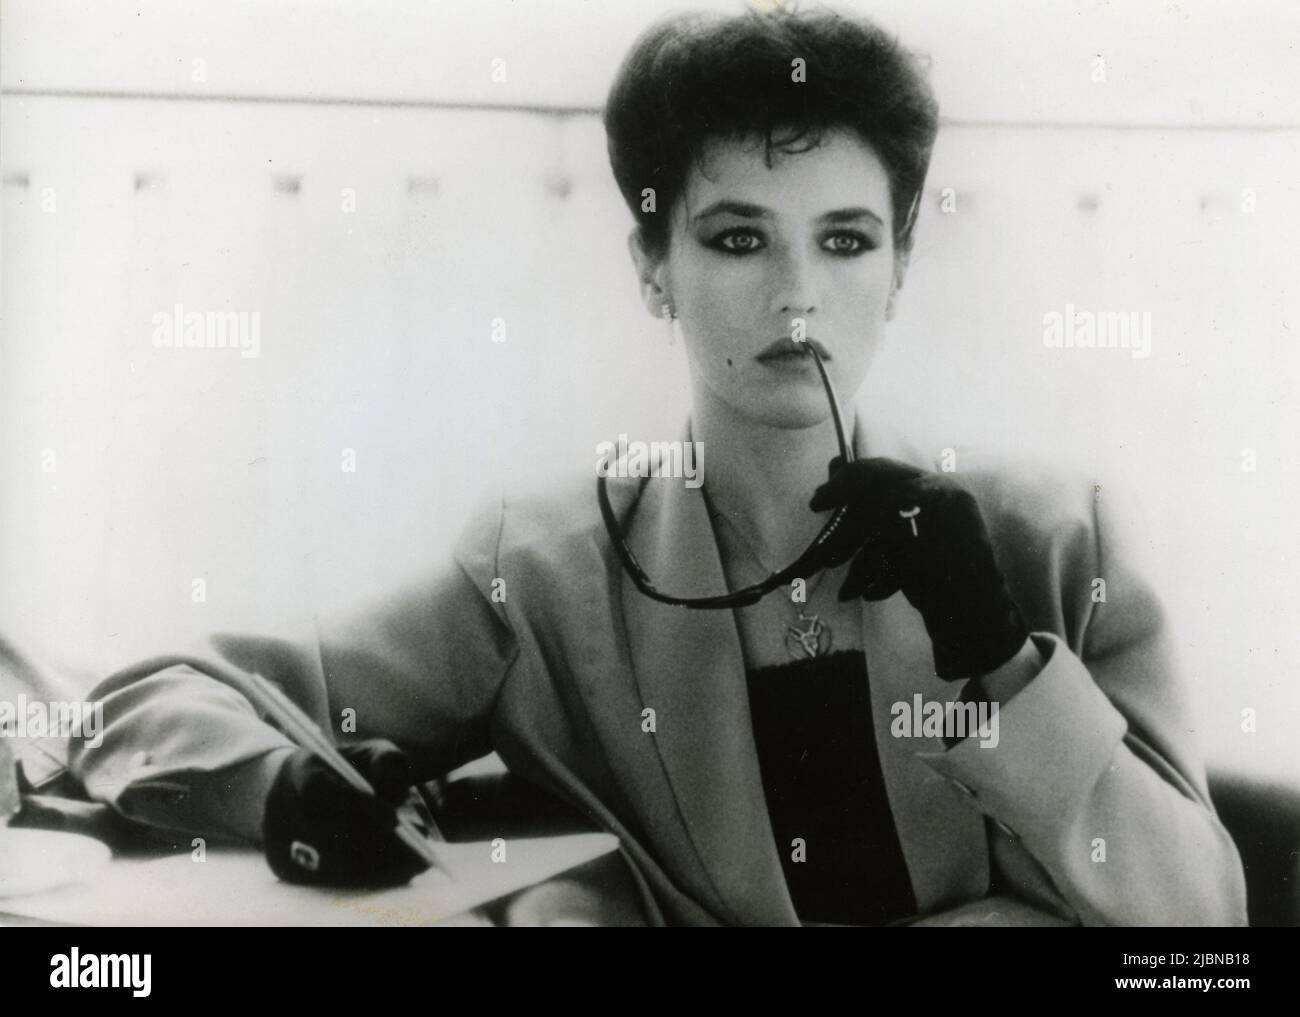 L'attrice francese Isabelle Adjani nel film Deadly Circuit, Francia 1982 Foto Stock